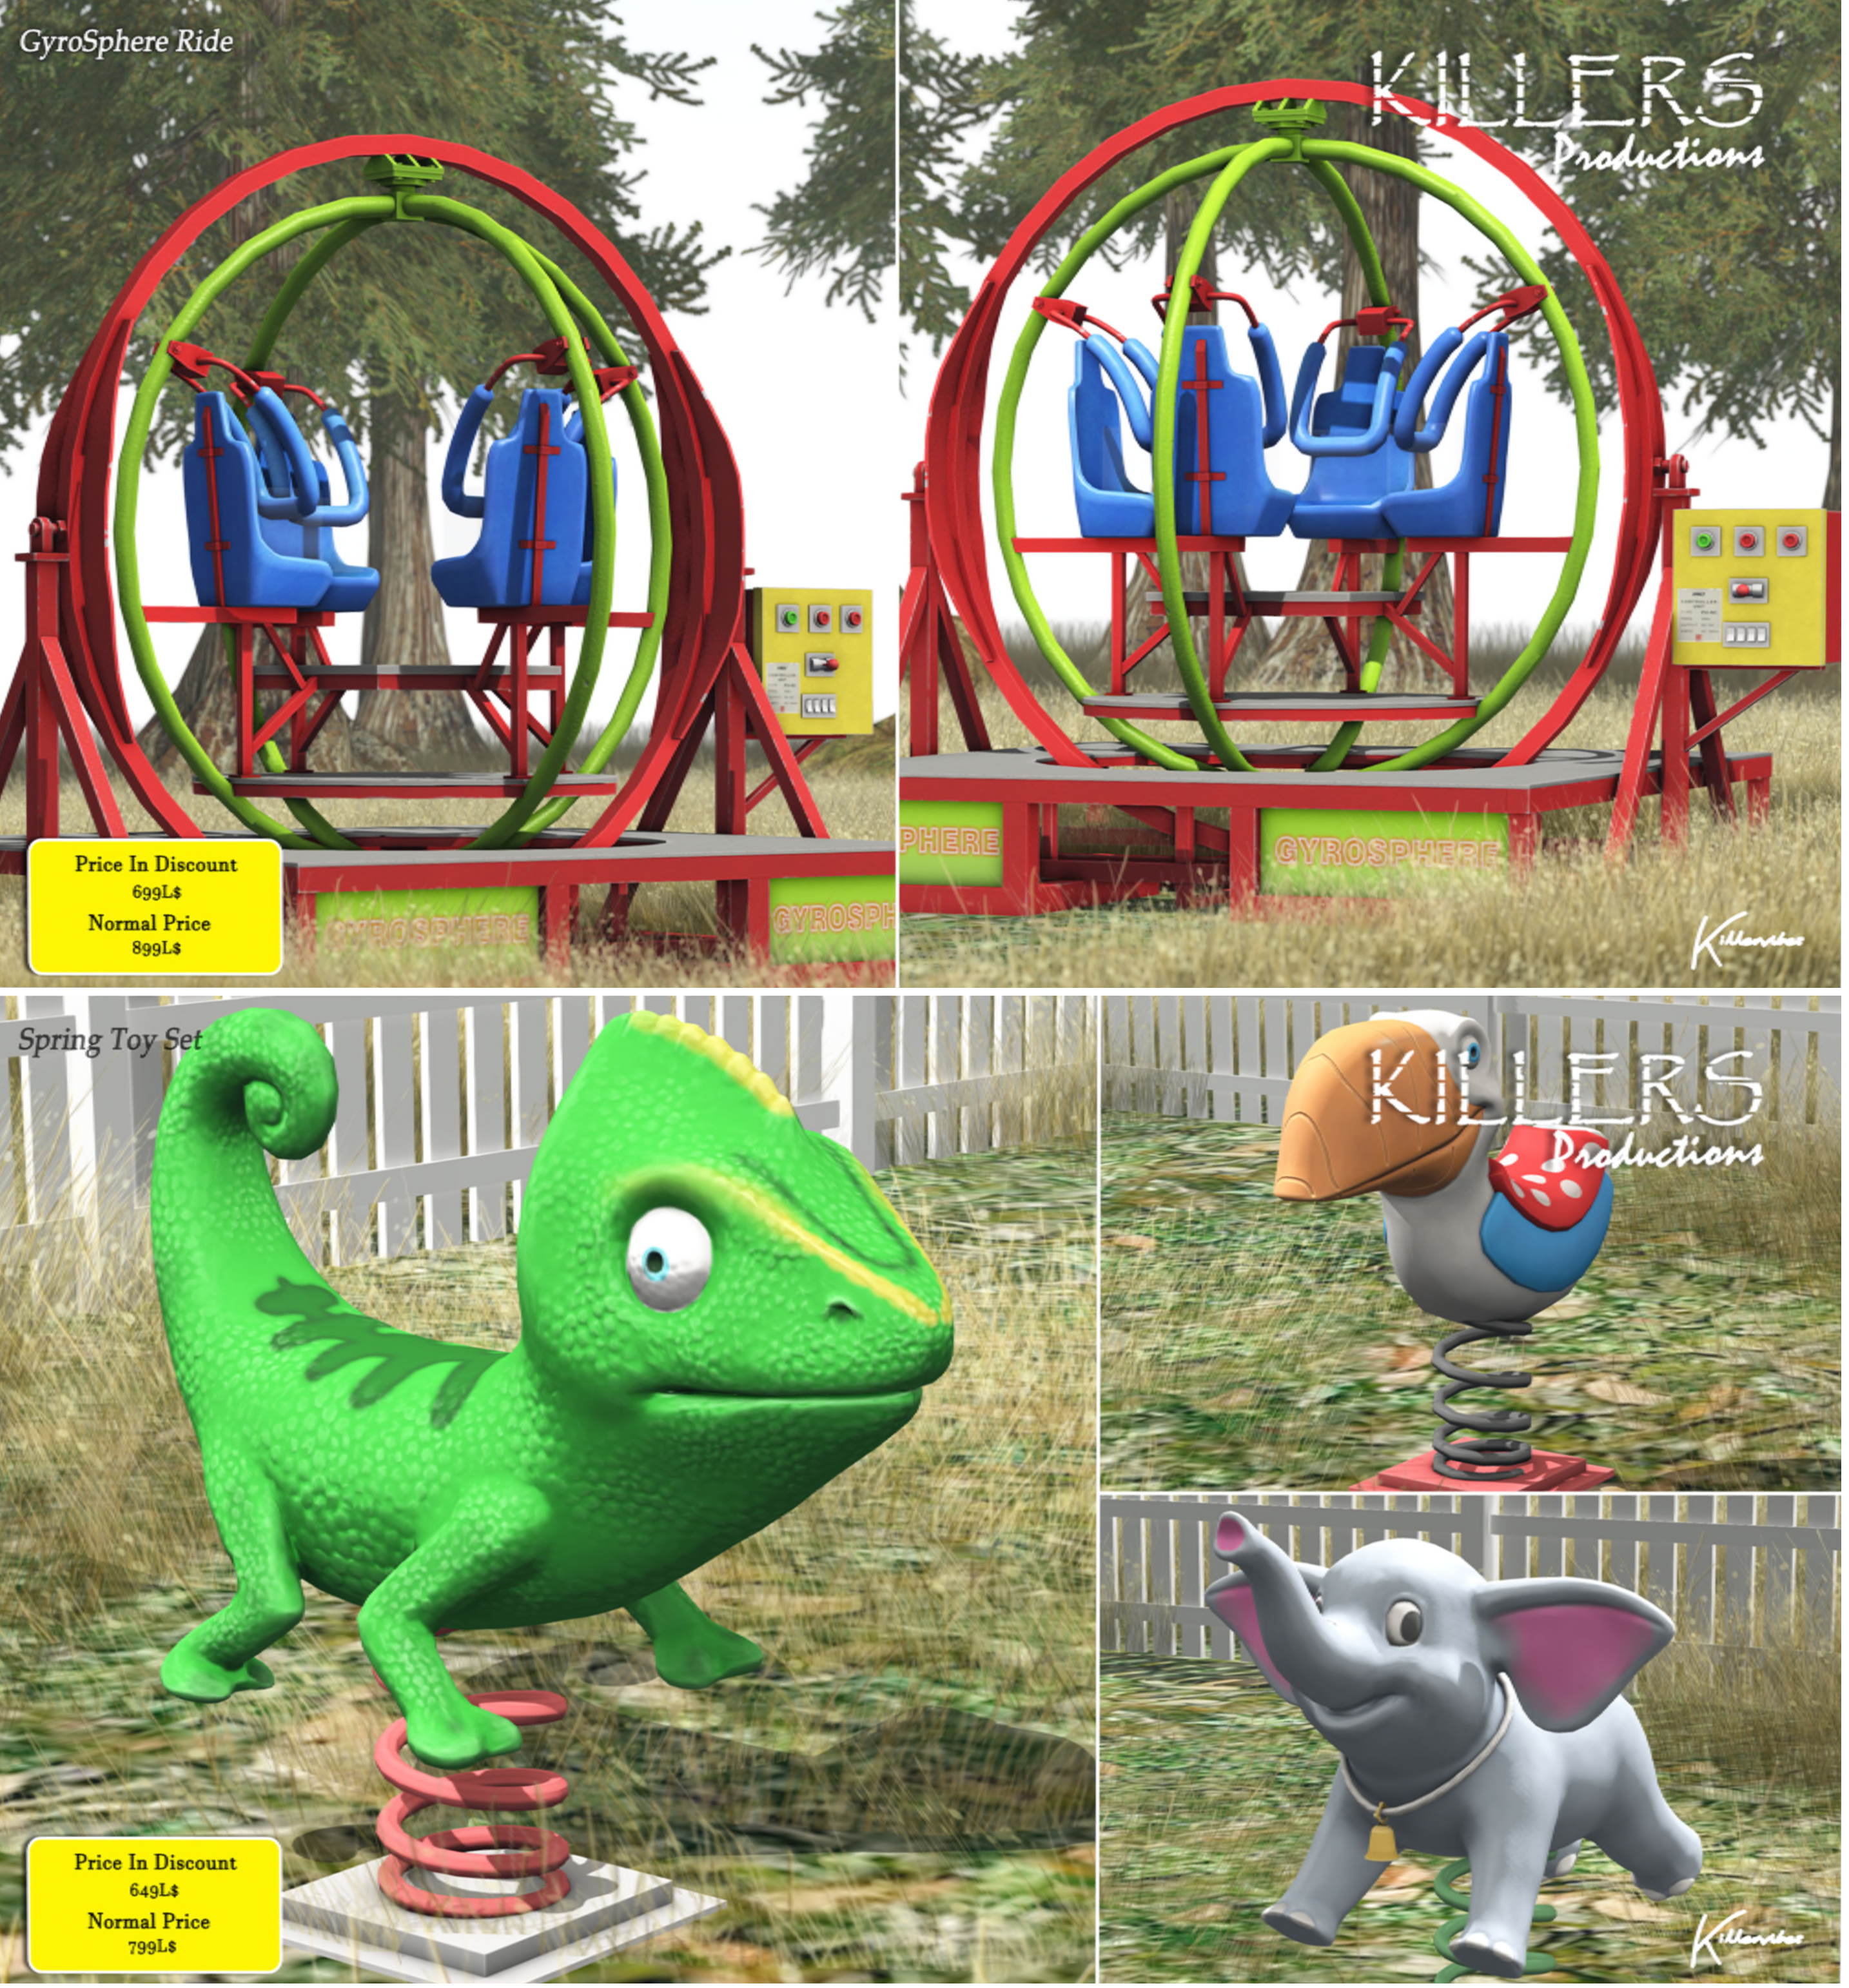 Killers Productions – Gyrosphere Ride & Spring Toy Set